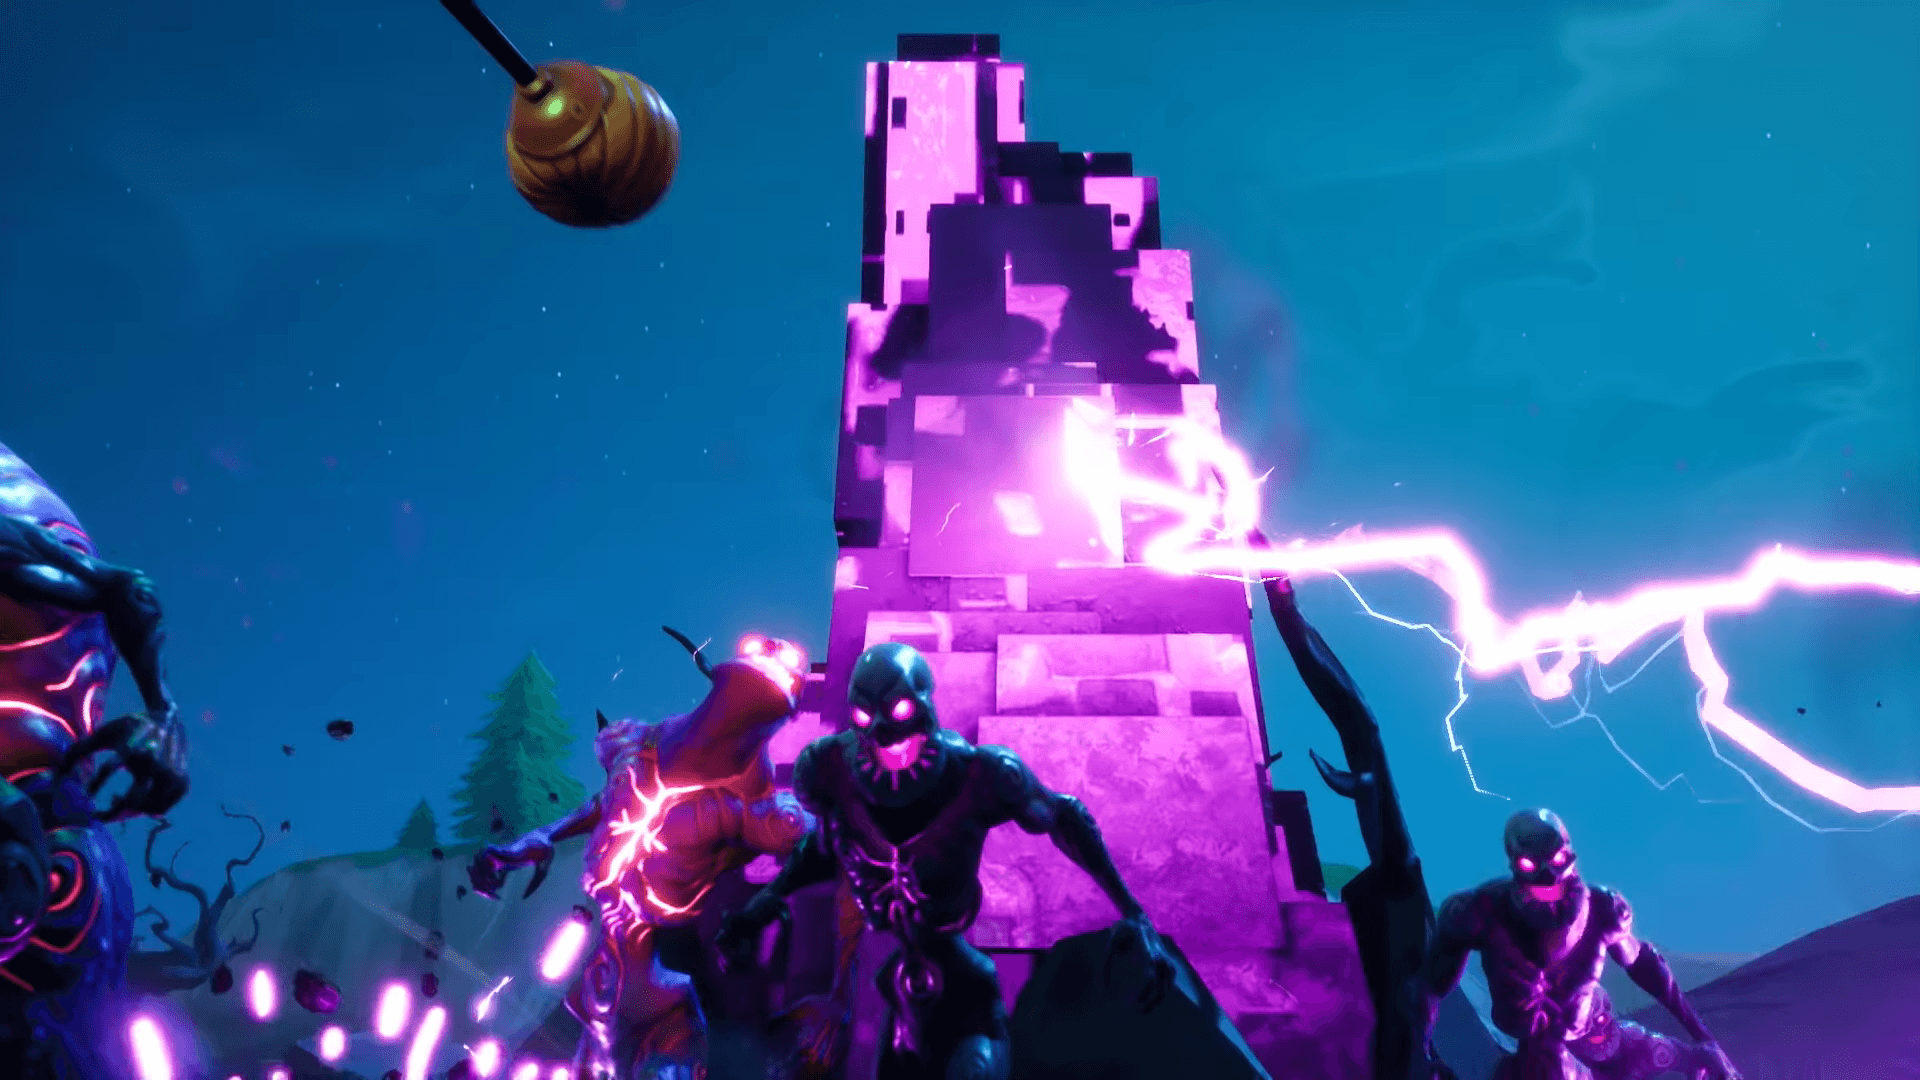 You can sneak past Cube Monsters on Fortnite: Battle Royale. Dot